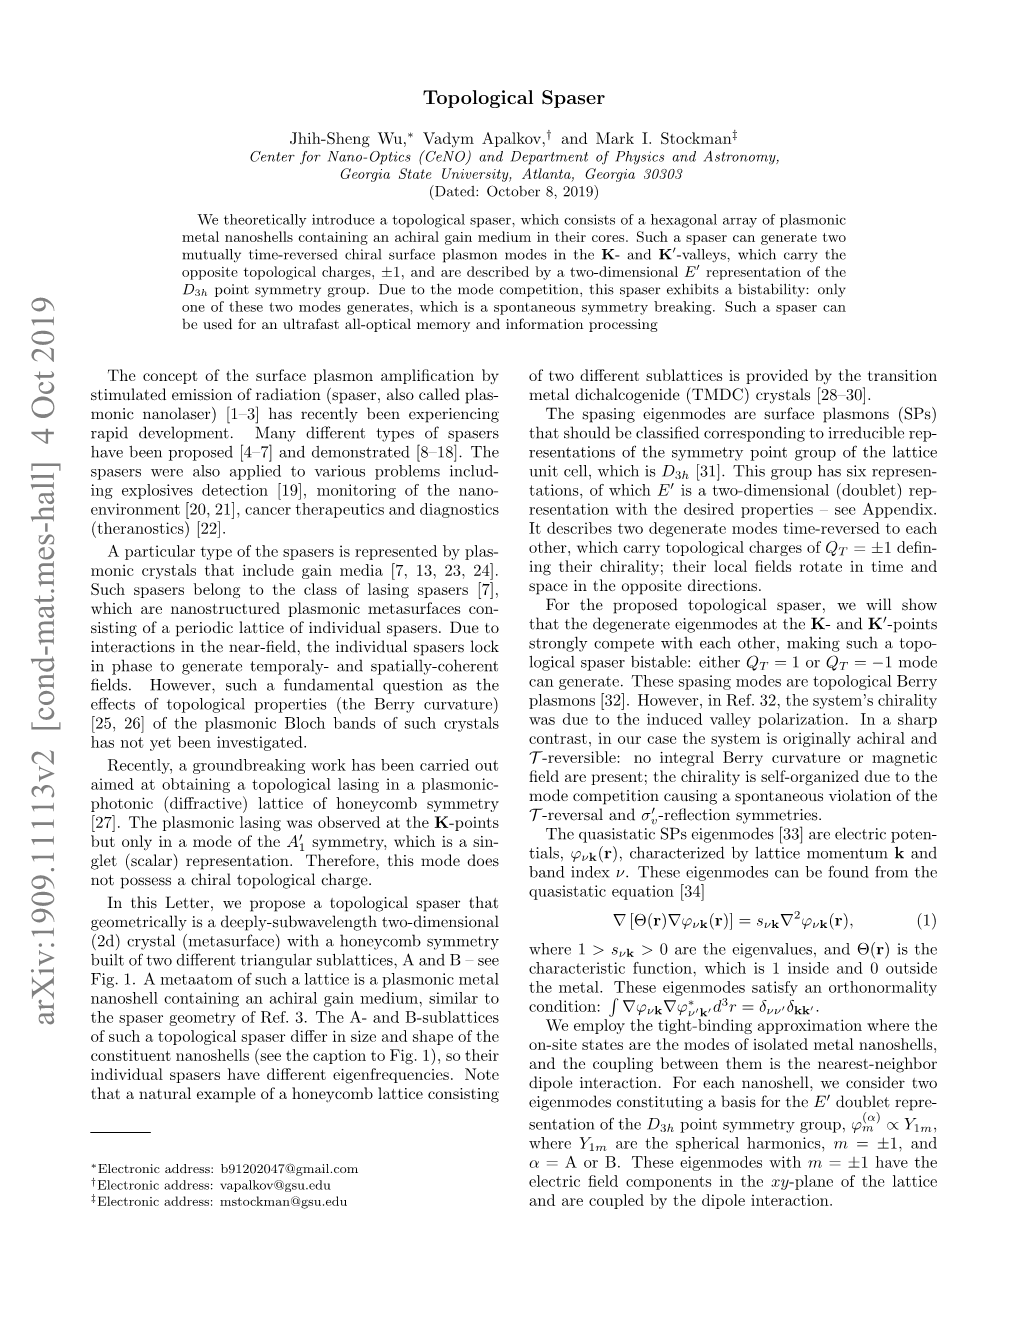 Arxiv:1909.11113V2 [Cond-Mat.Mes-Hall] 4 Oct 2019 the Spaser Geometry of Ref